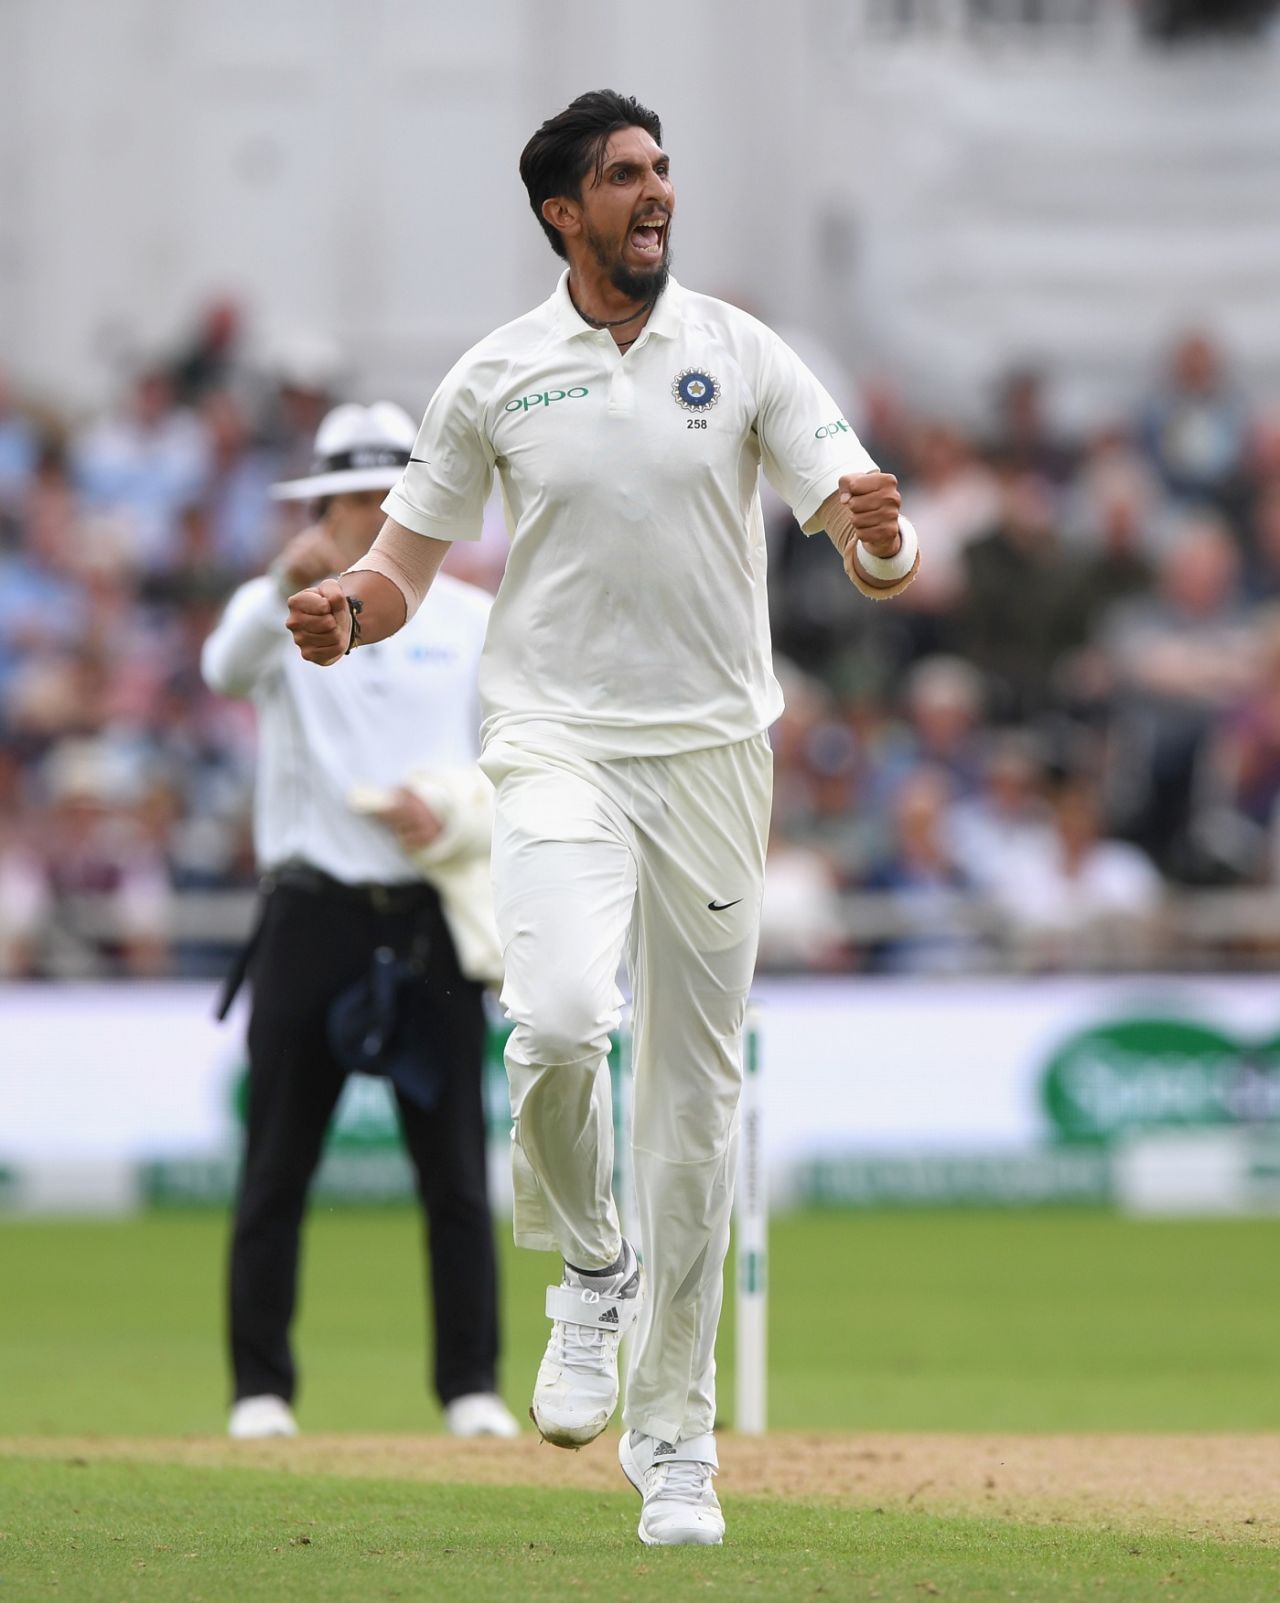 Ishant Sharma is overjoyed after taking a wicket, England v India, 3rd Test, Trent Bridge, 2nd day, August 19, 2018